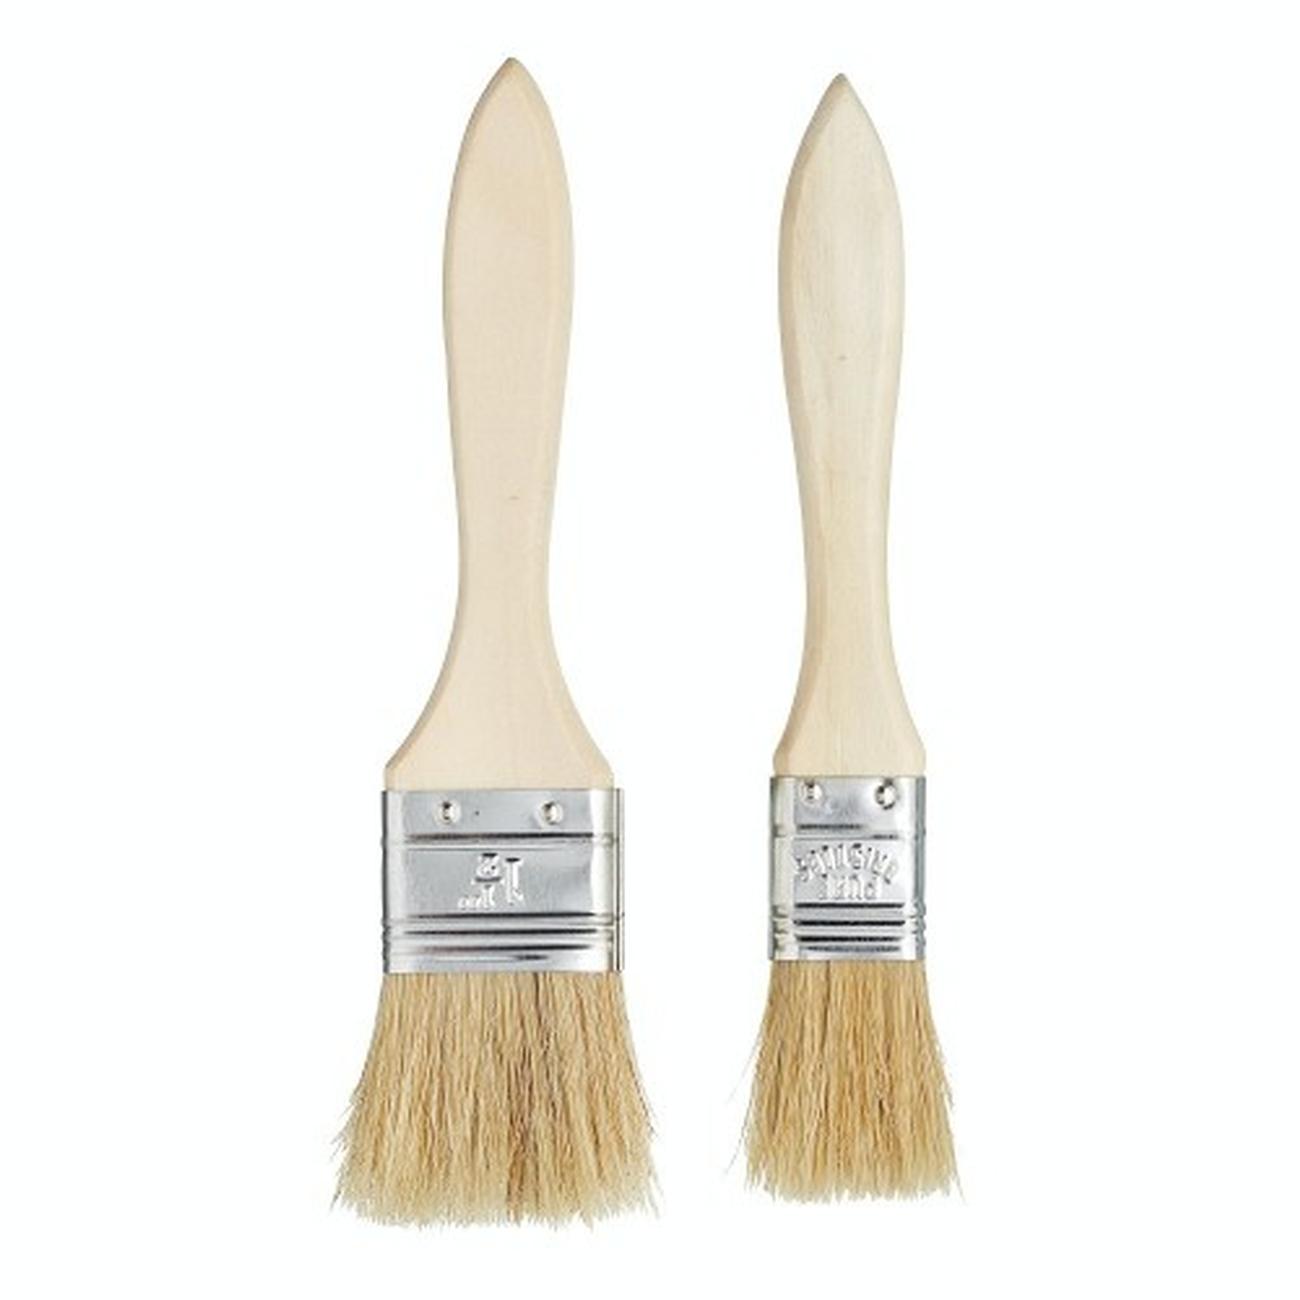 kitchencraft-wide-pastry-brushes-set-of-2 - KitchenCraft Set of 2 Pastry & Basting Brushes